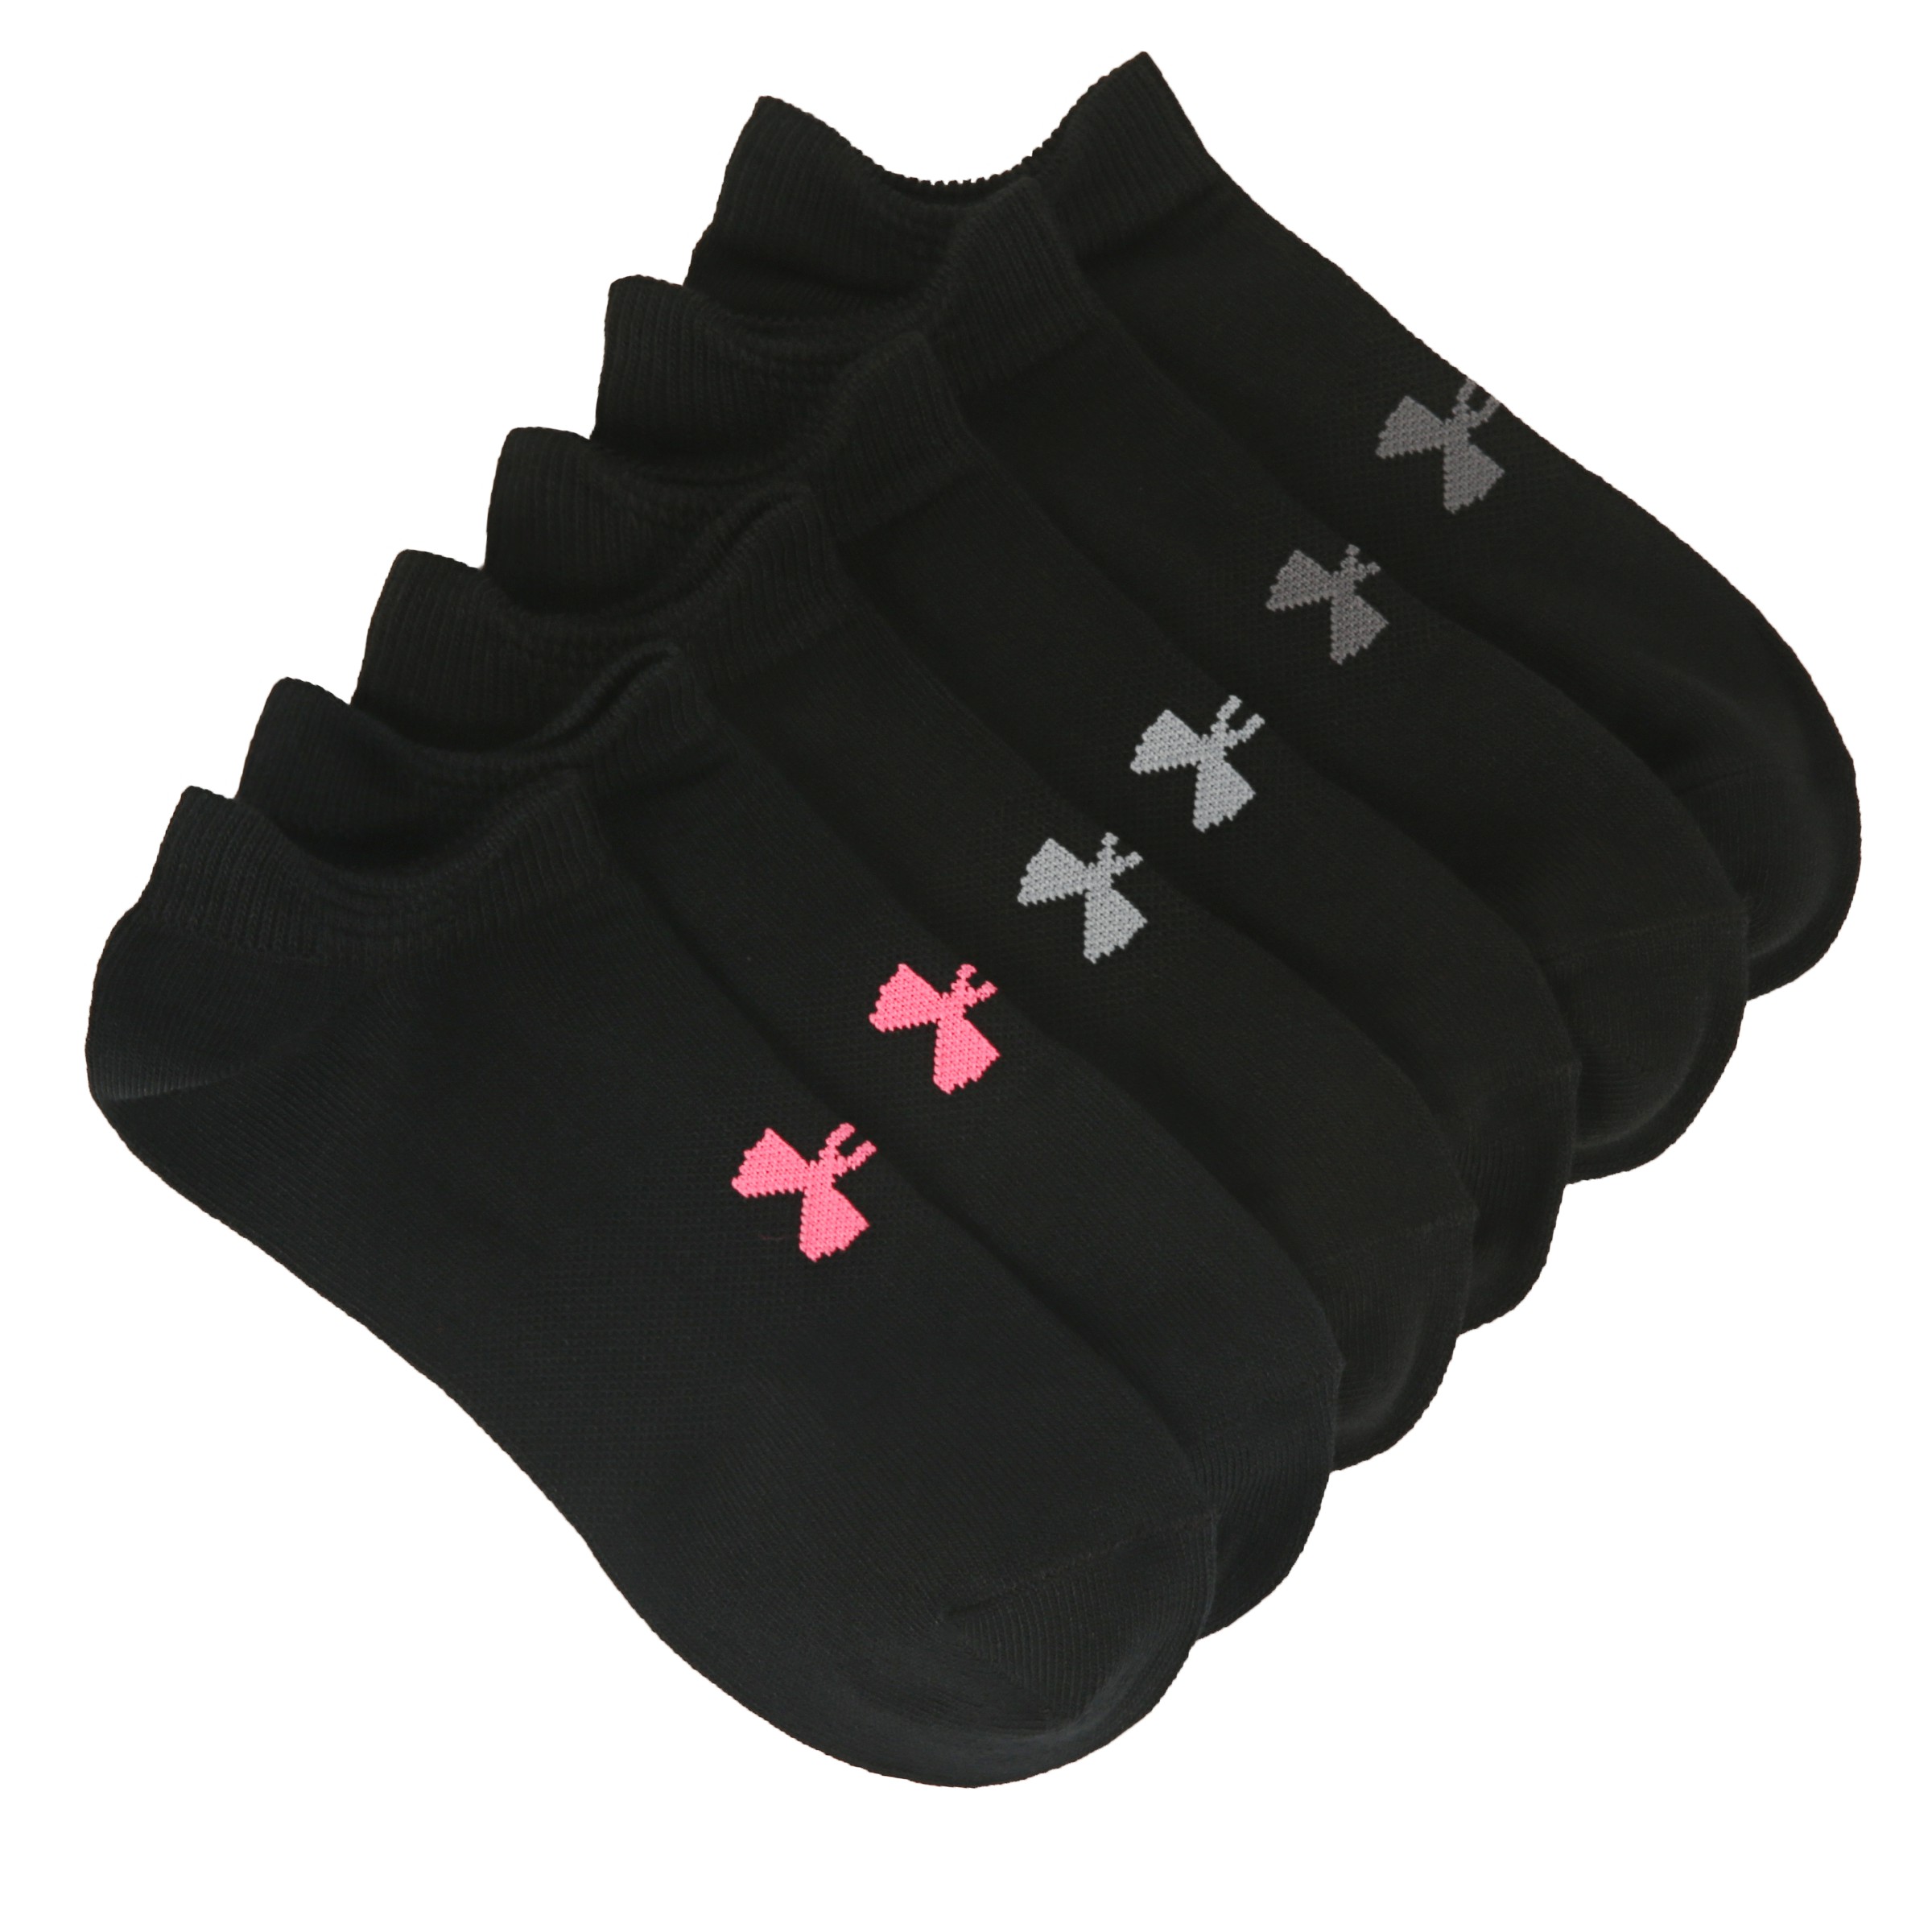 Under Armour Women's 6 Pack Essential No Show Socks | Famous Footwear